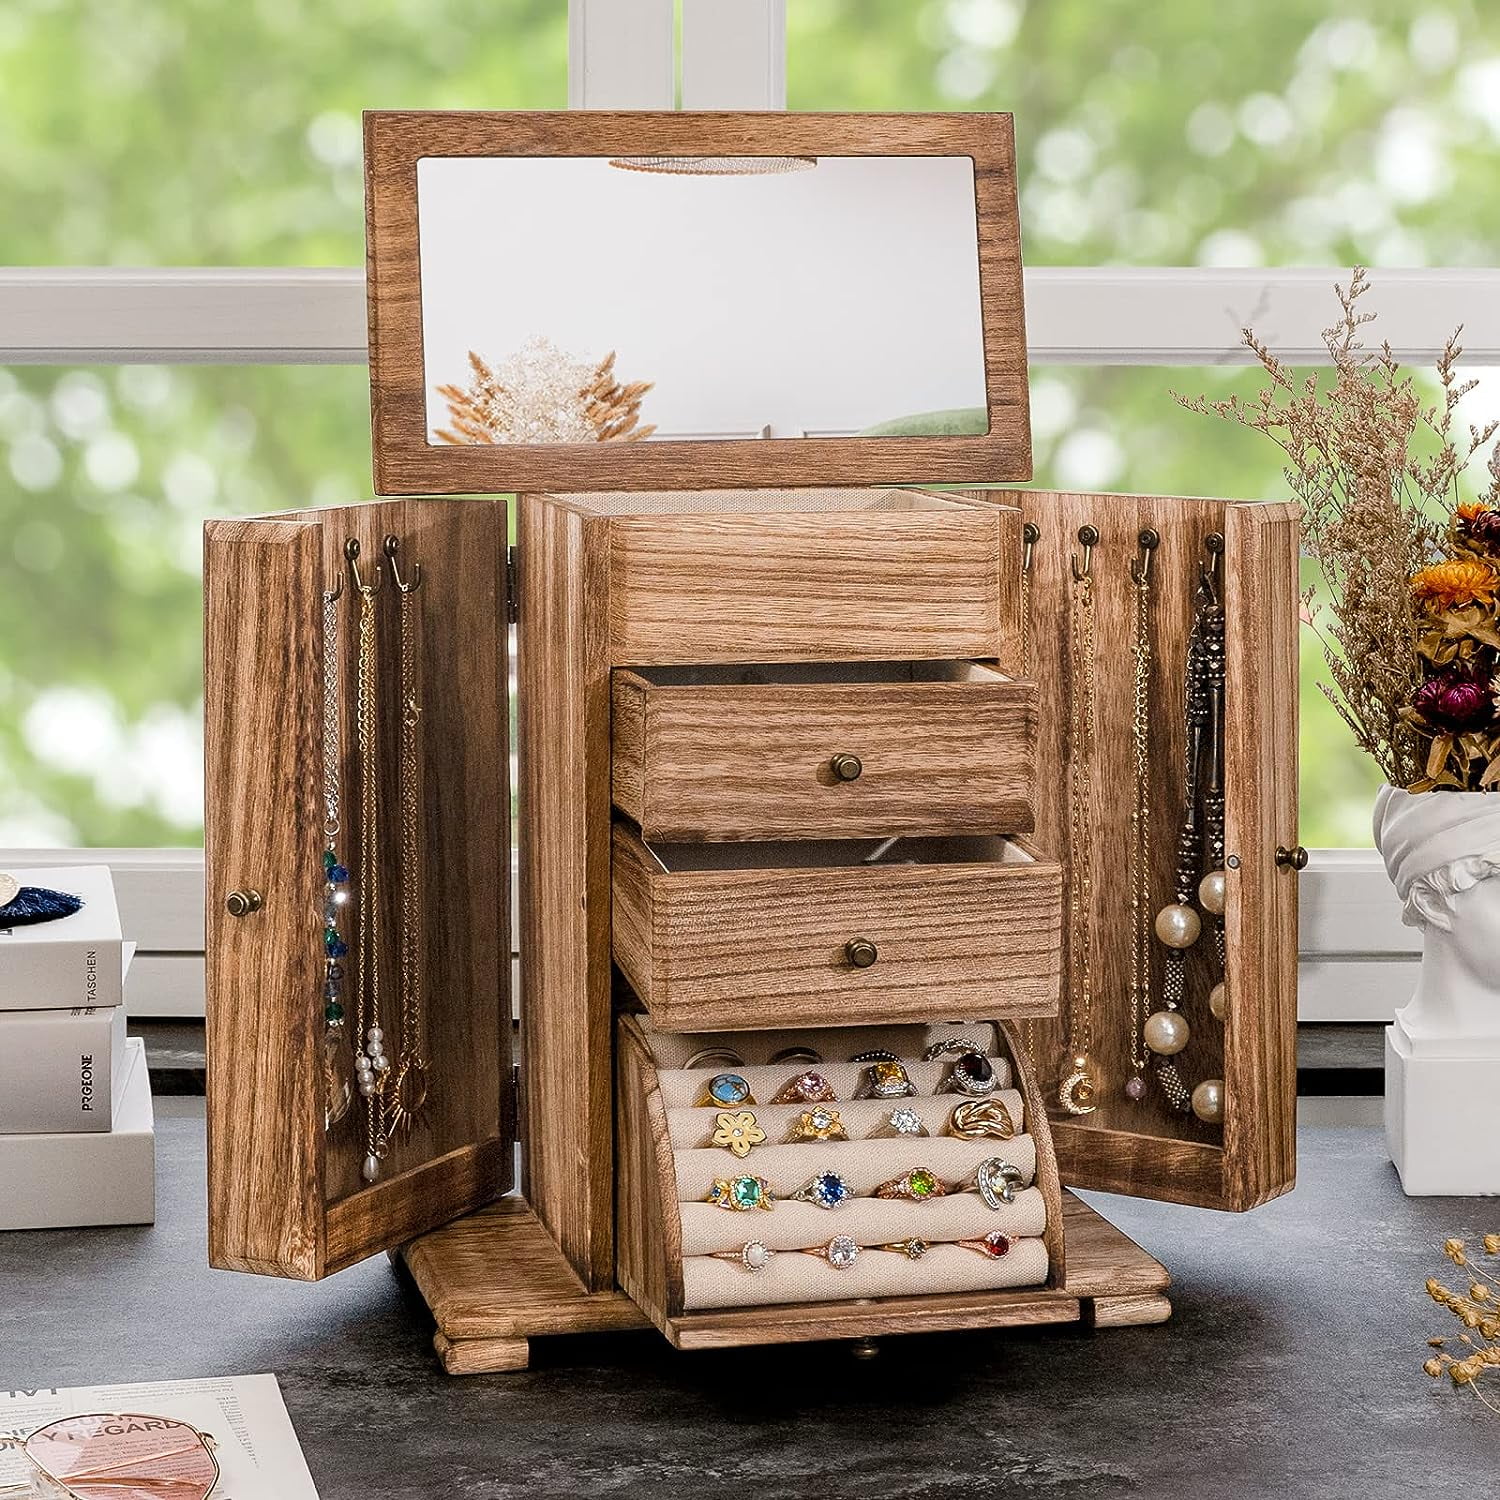 Large Rustic Jewelry Chest With Mirror For Women 5 Layer Wood Organizer For  Necklaces, Earrings, Rings, And Bracelets By Emfogo From Mohammed_vip,  $24.75 | DHgate.Com